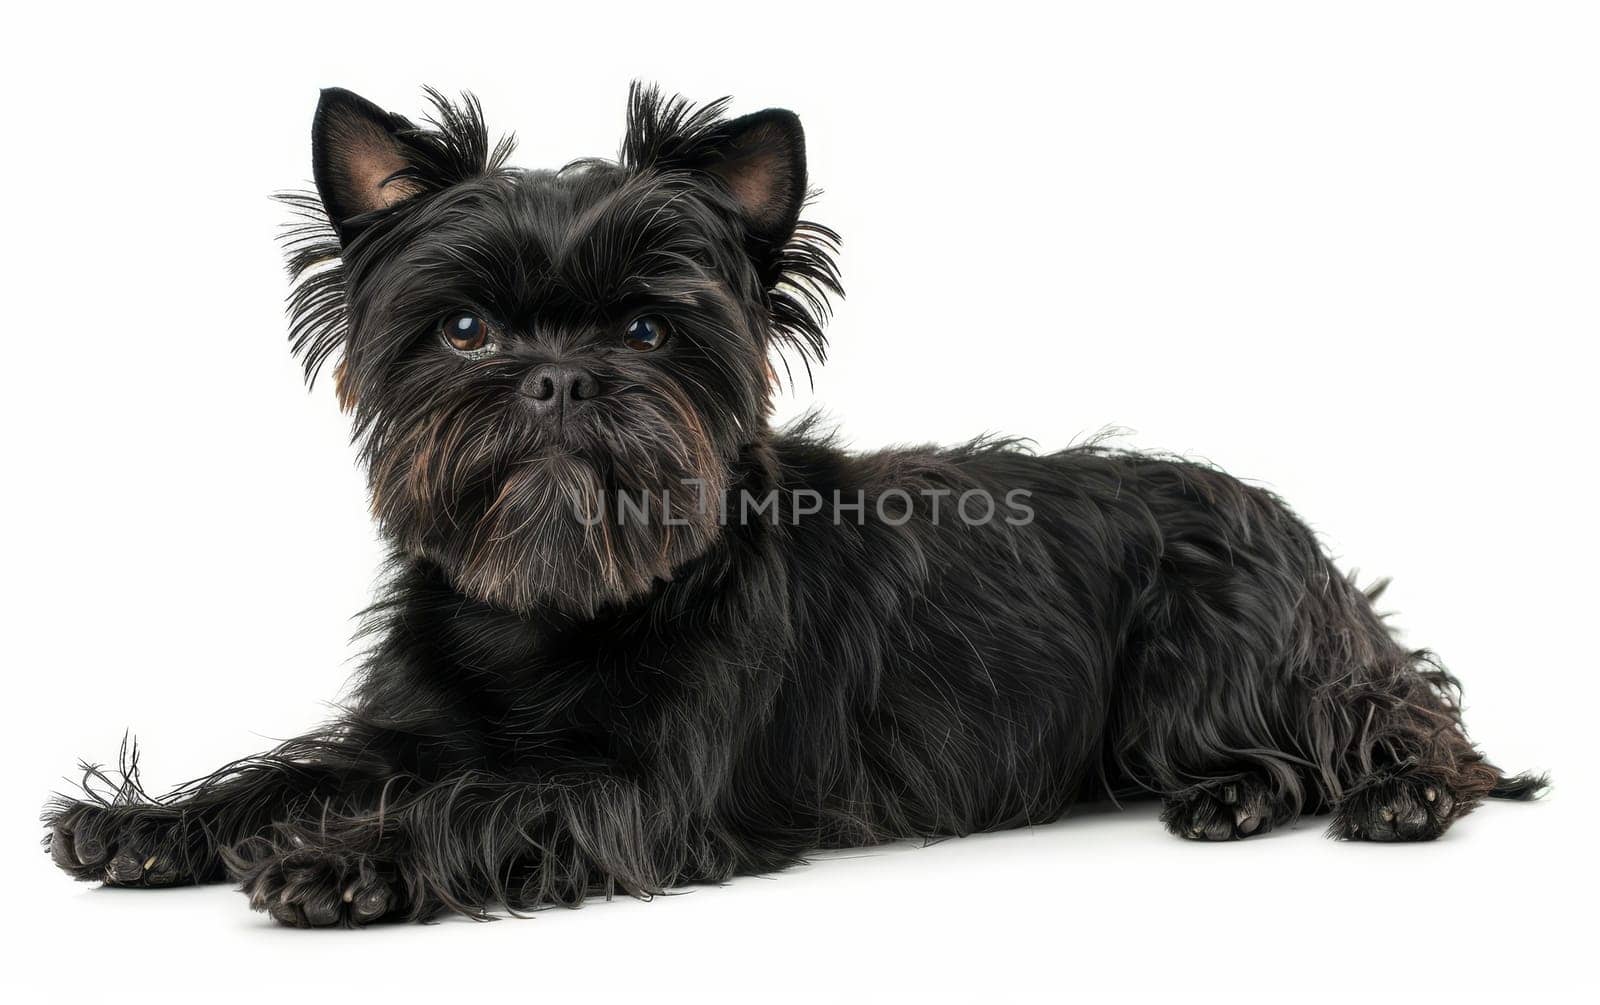 A small black Affenpinscher lies elegantly against a white background, its piercing gaze captivating the viewer. Its long, silky fur and distinguished beard give it a look of wise curiosity. by sfinks